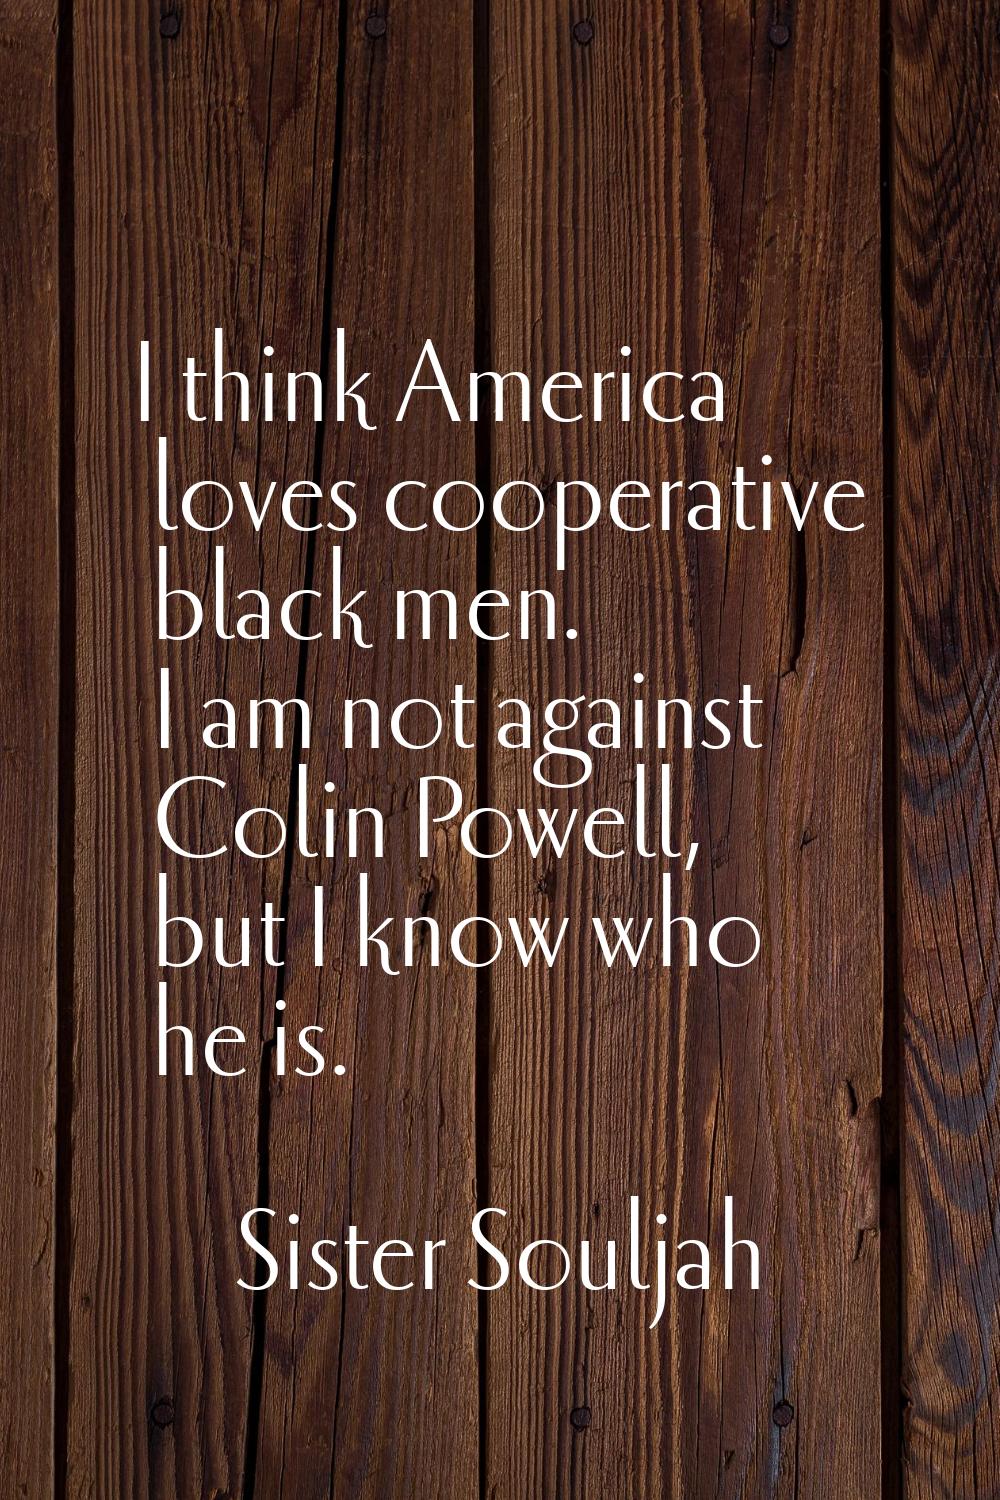 I think America loves cooperative black men. I am not against Colin Powell, but I know who he is.